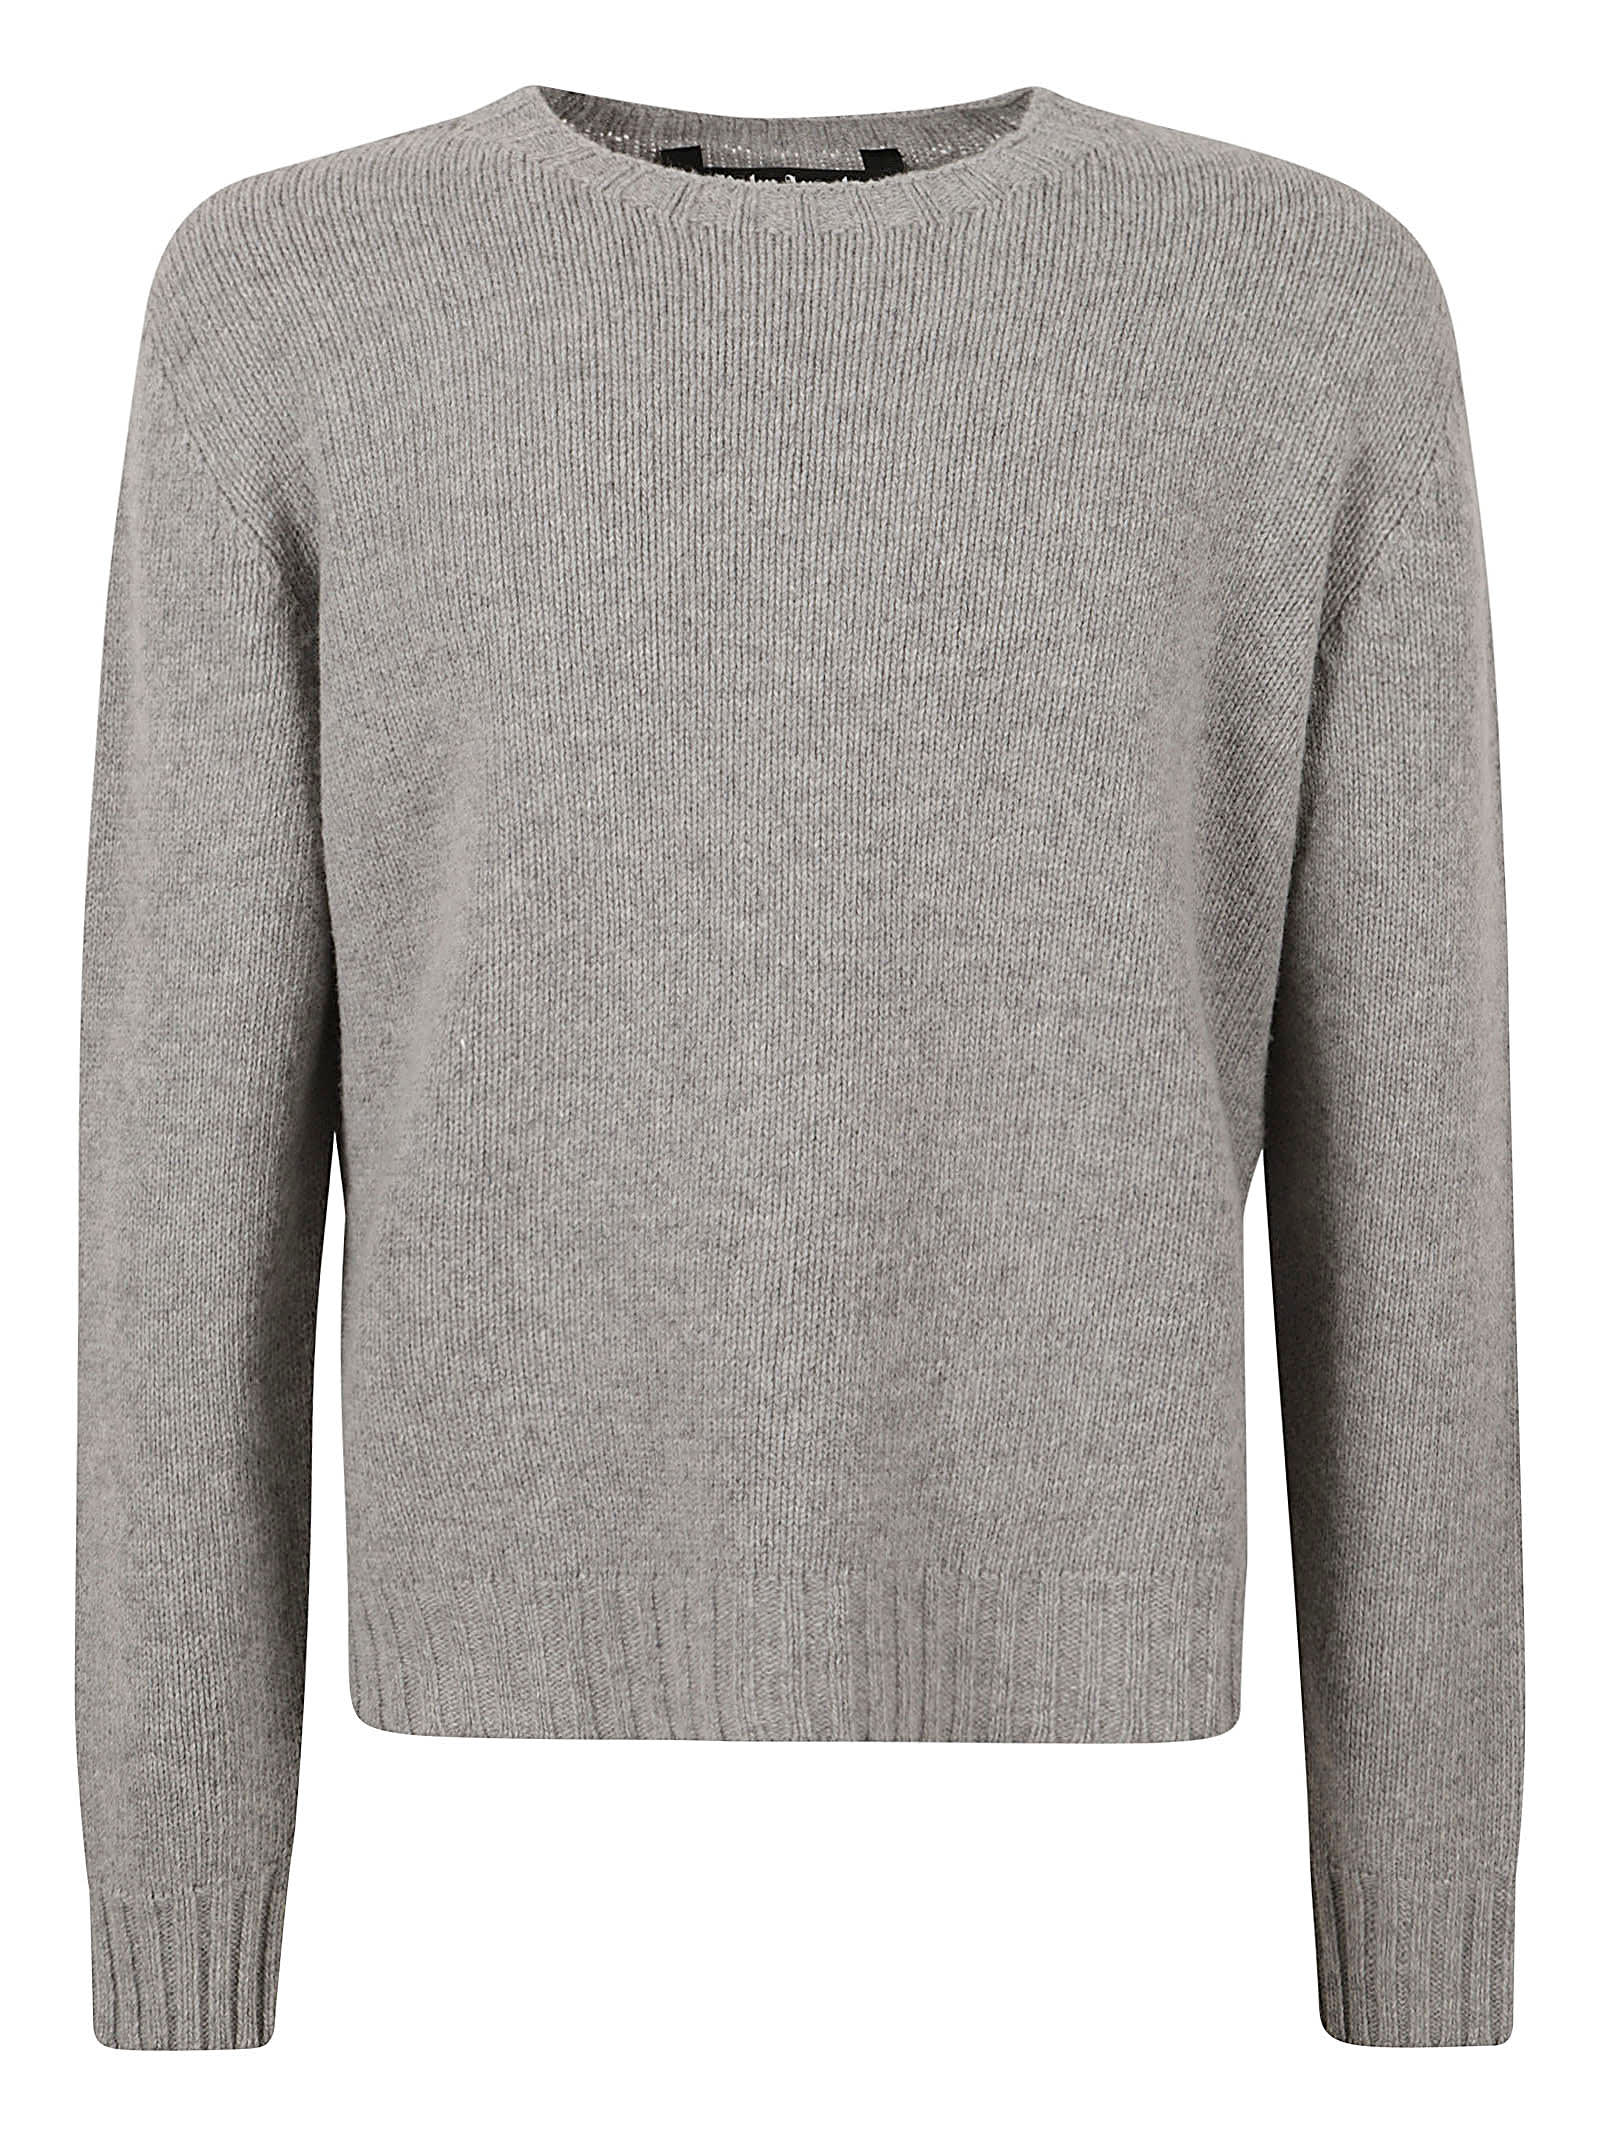 Palm Angels Curved Logo Sweater In Melange Grey/white